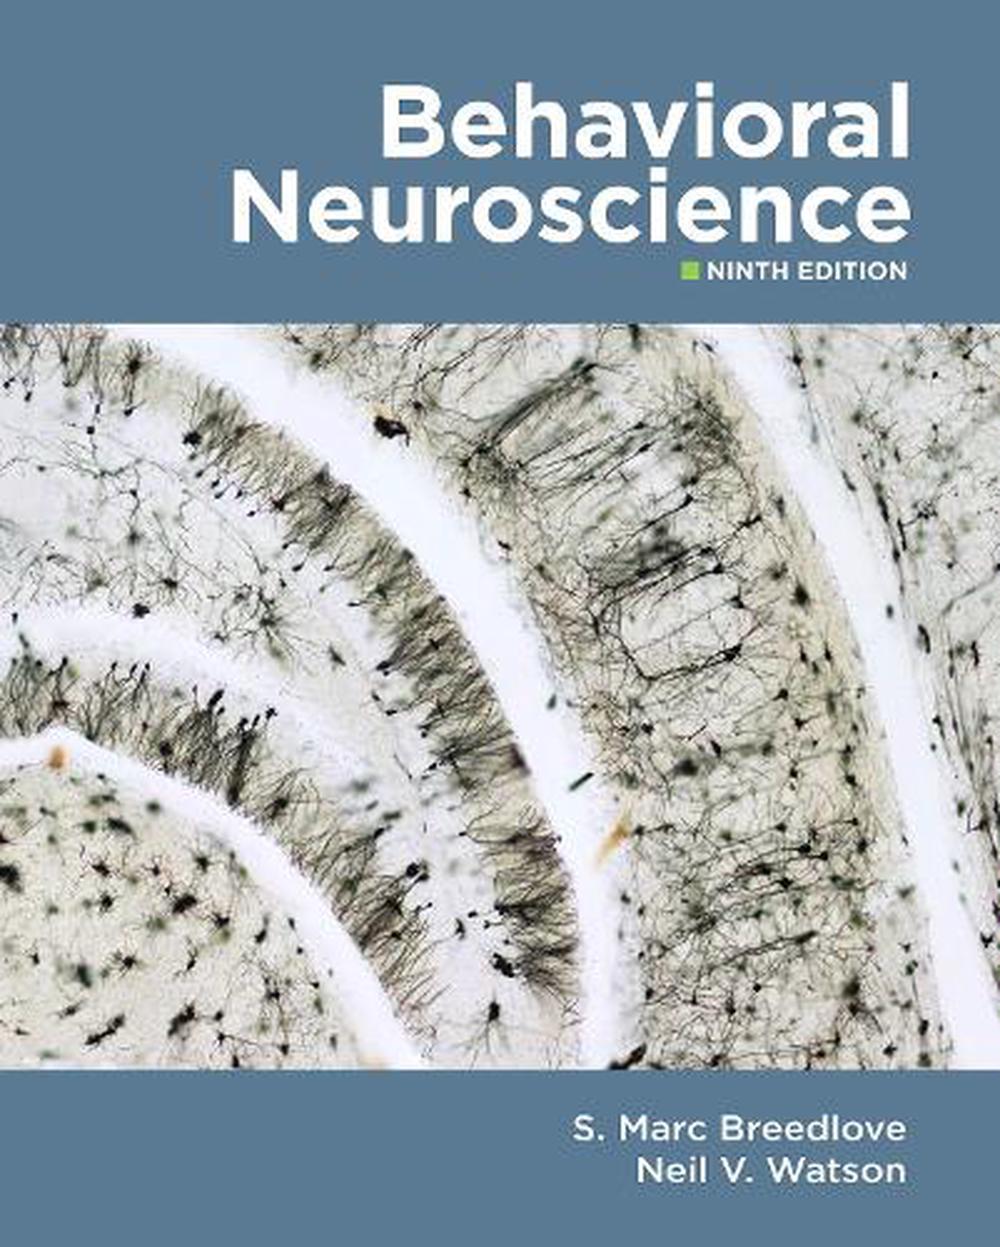 by　9781605359076　online　The　S.　Marc　at　9th　Neuroscience,　Buy　Nile　Breedlove,　Edition　Behavioral　Hardcover,